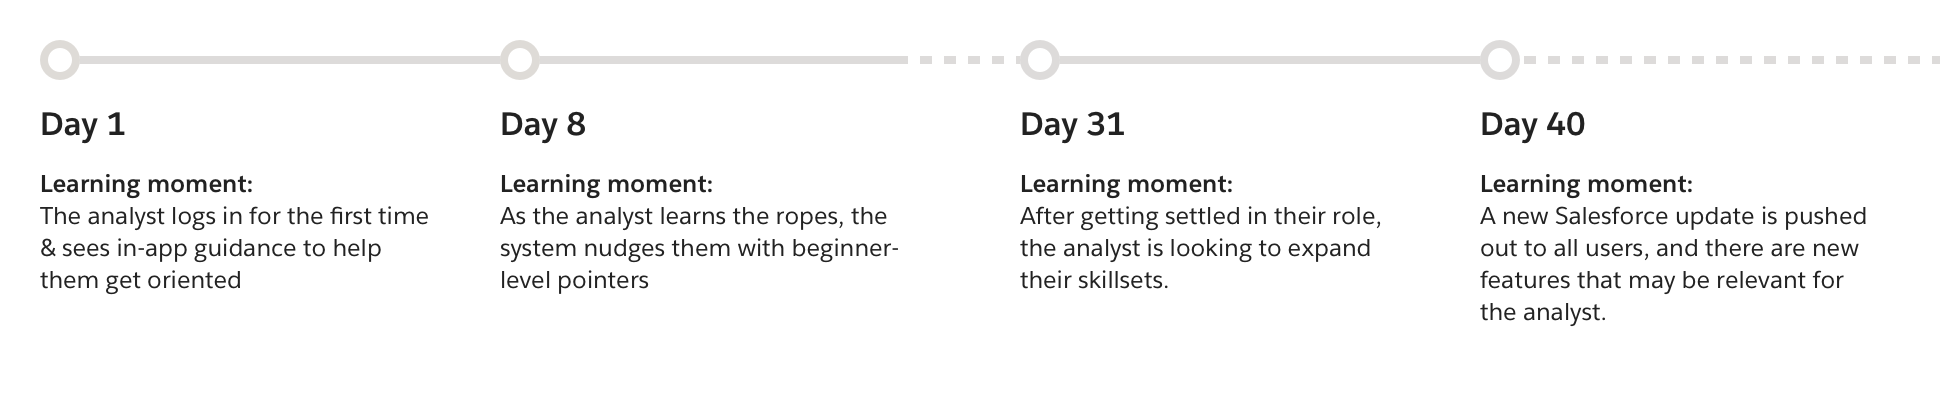 Sample timeline with key learning moments